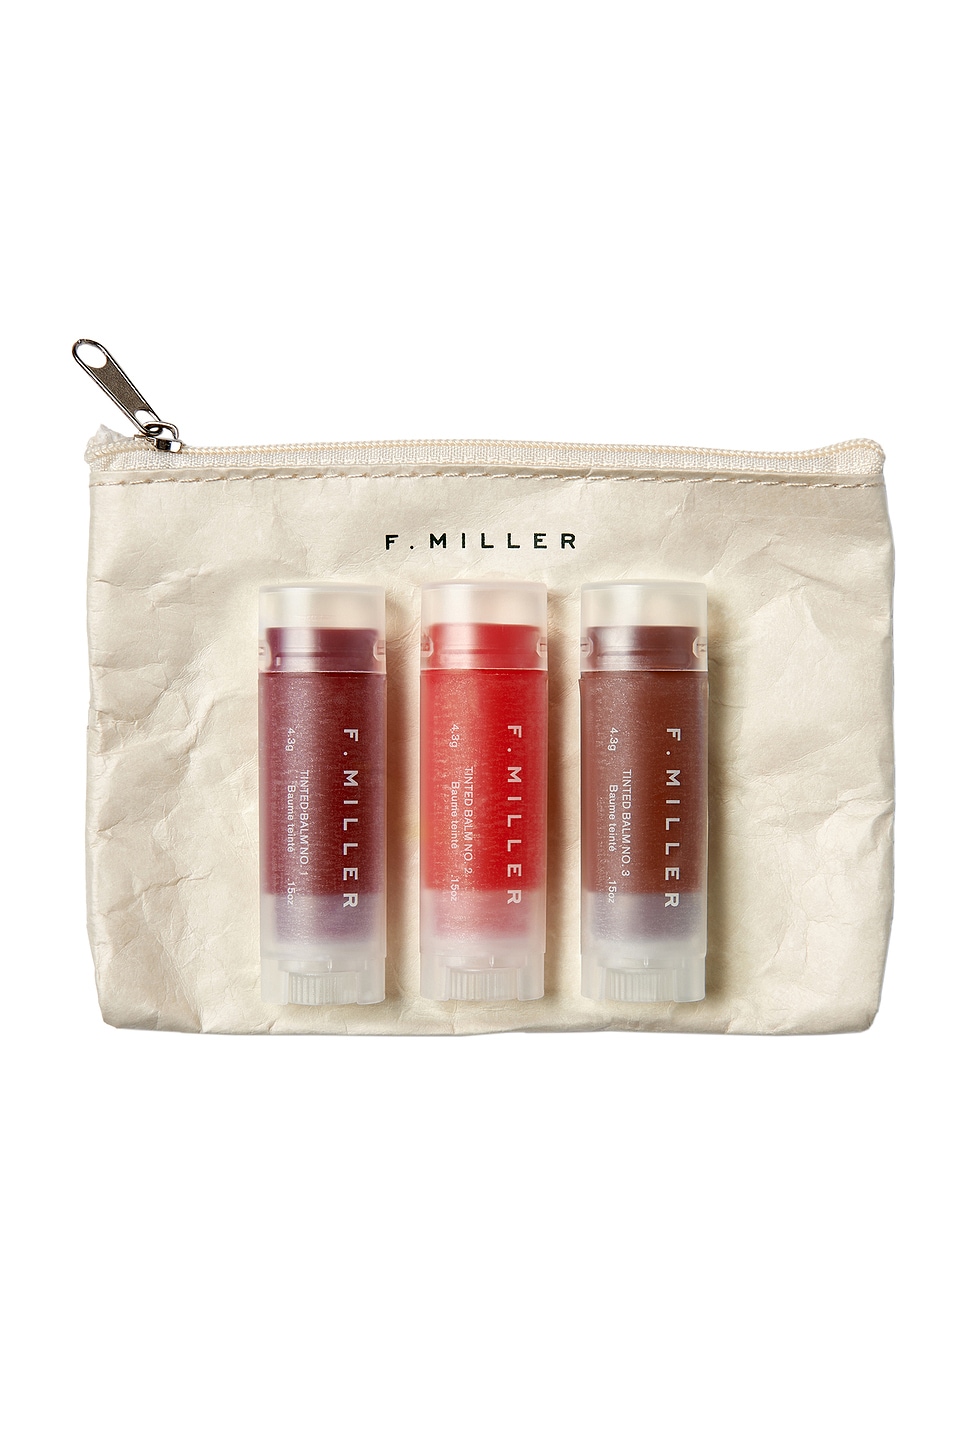 Tinted Balm Kit in Beauty: NA